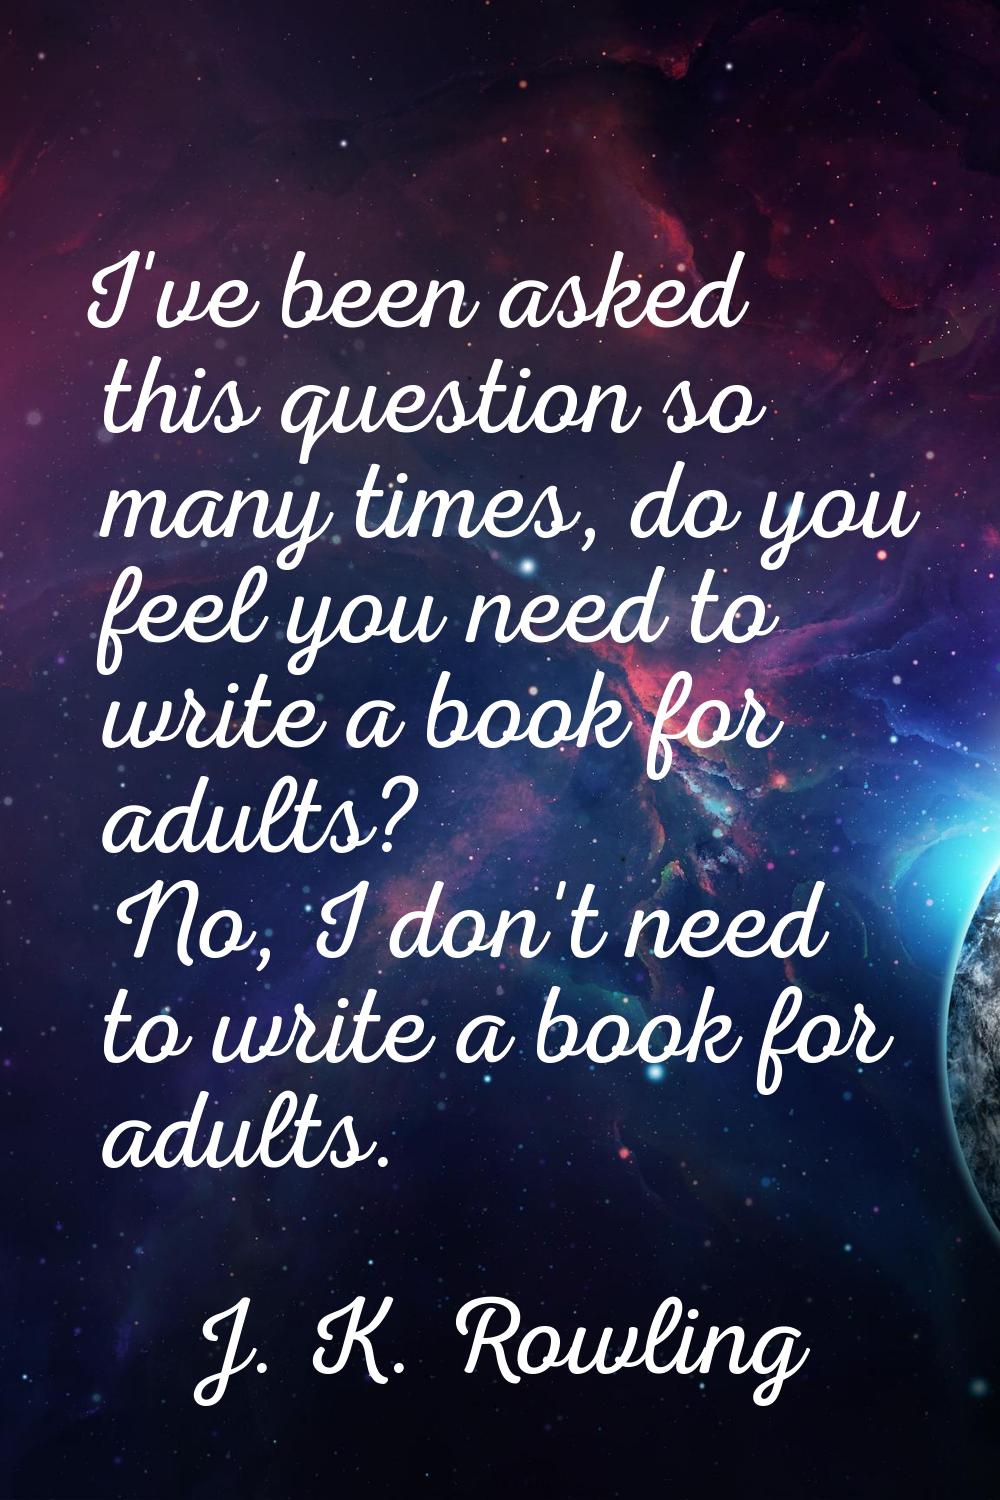 I've been asked this question so many times, do you feel you need to write a book for adults? No, I